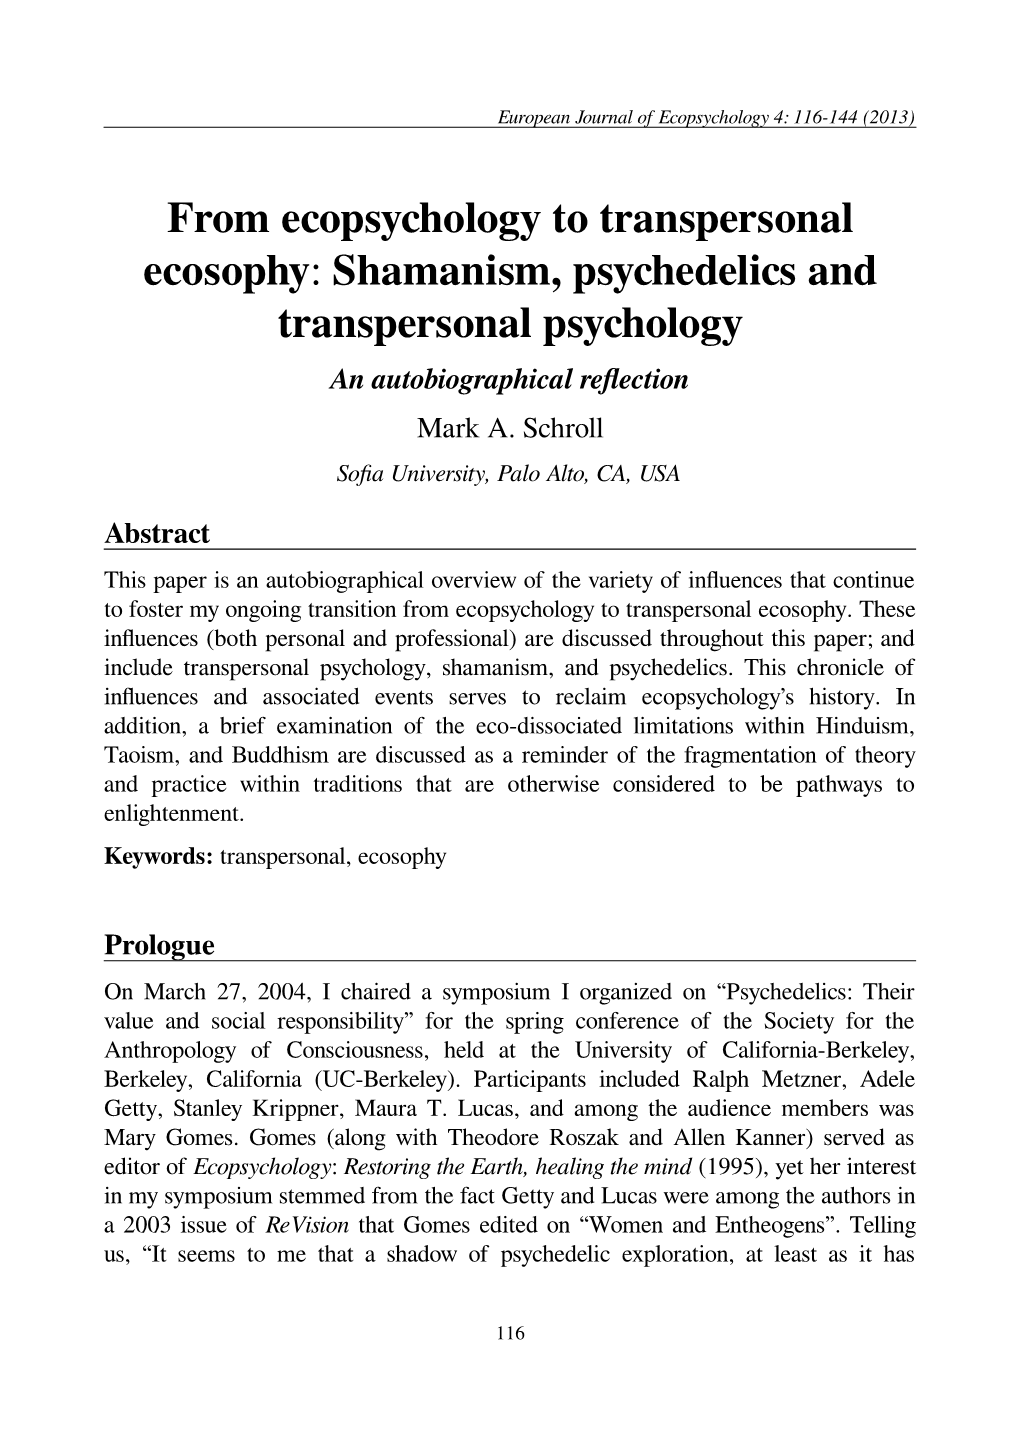 From Ecopsychology to Transpersonal Ecosophy: Shamanism, Psychedelics and Transpersonal Psychology an Autobiographical Reflection Mark A